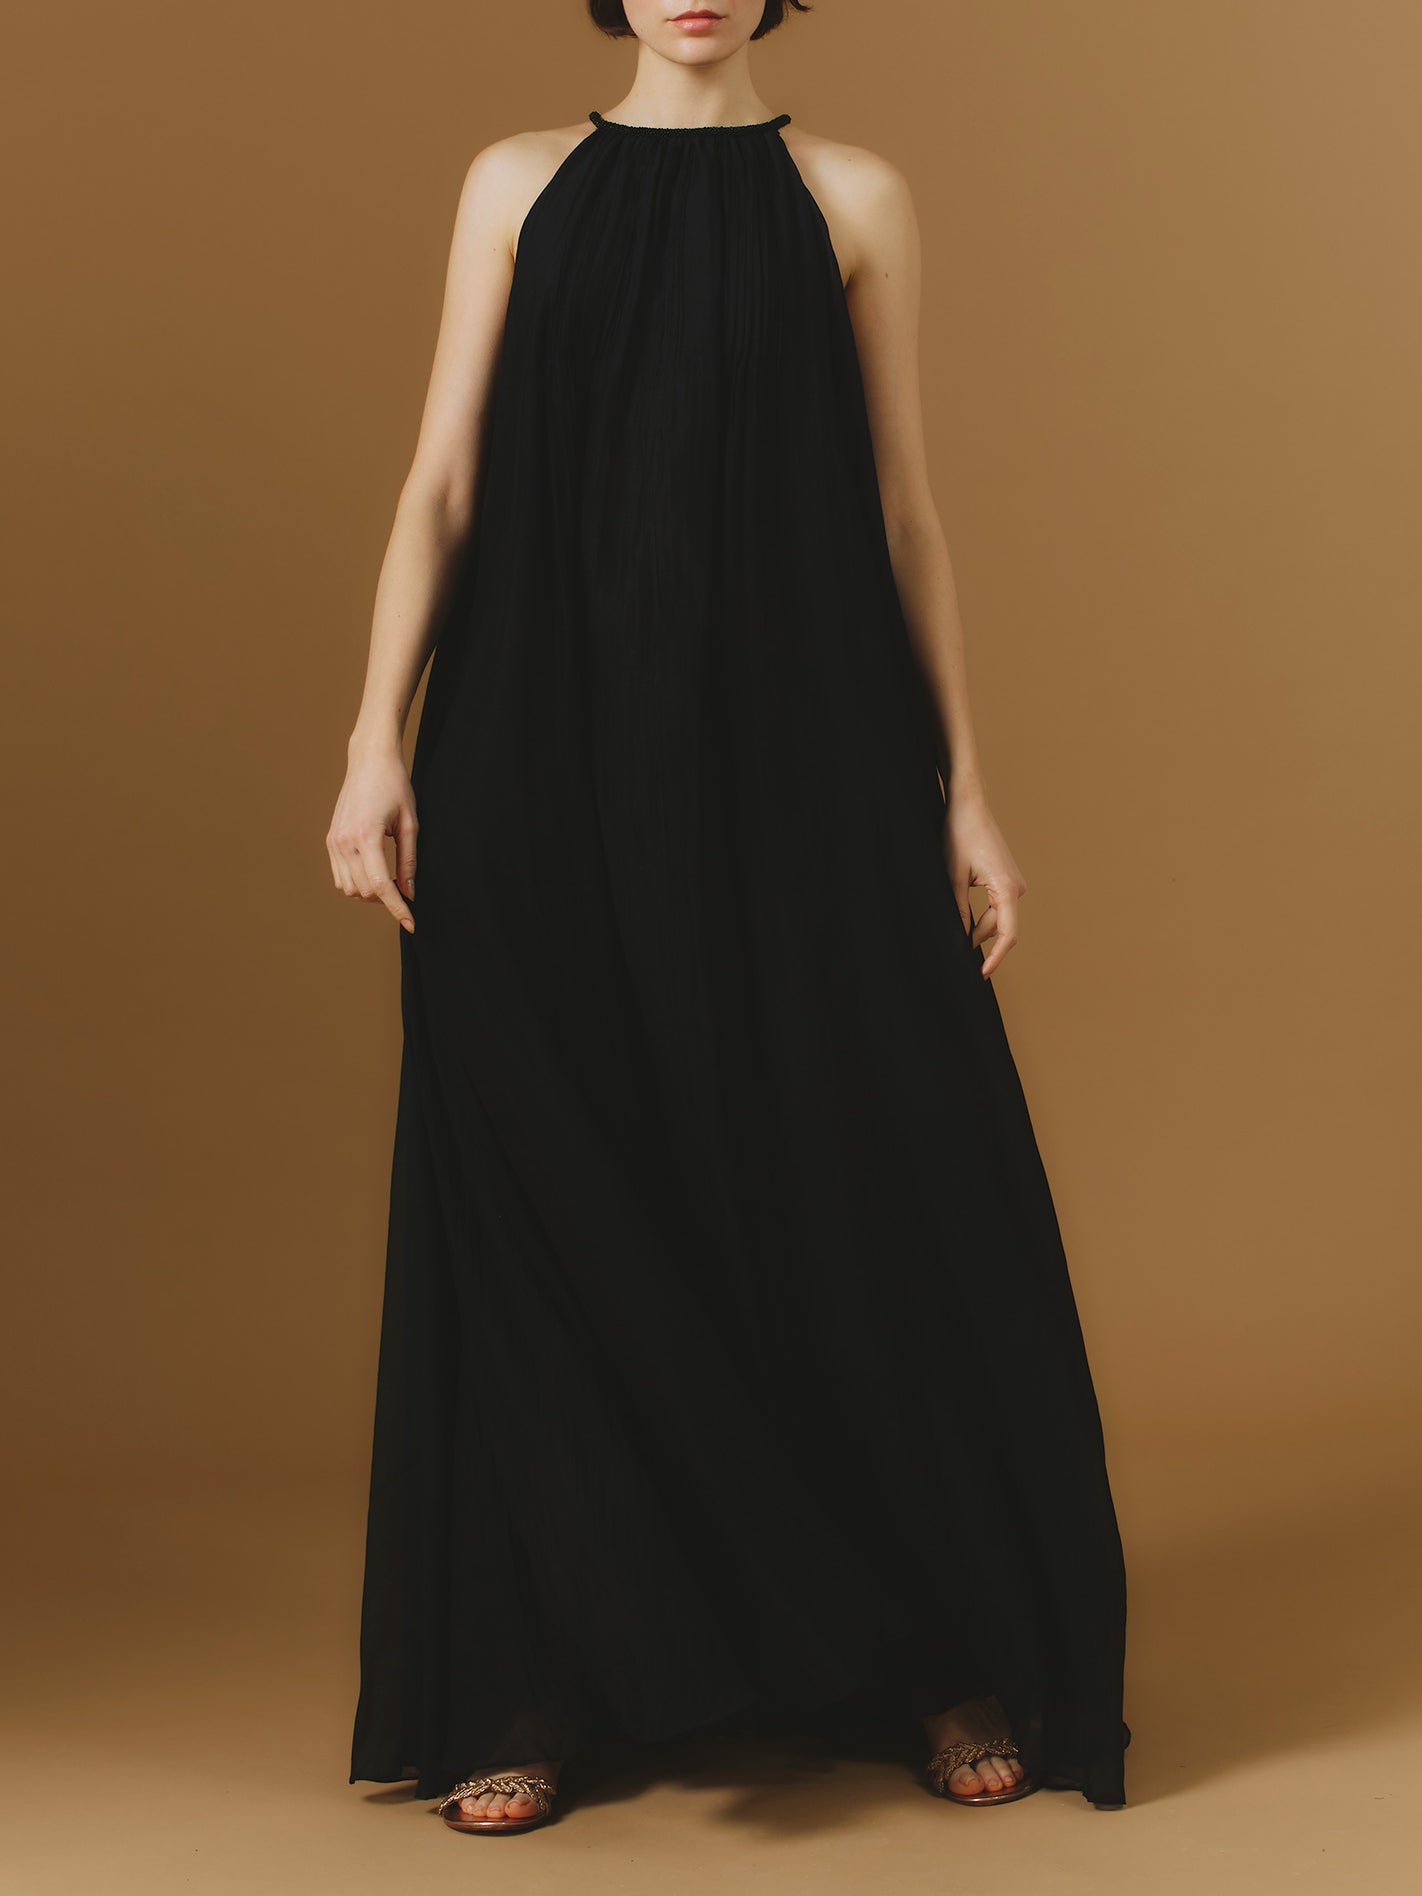 Front view of Zenith Chanderi Appliqué Black Long Dress by Thierry Colson